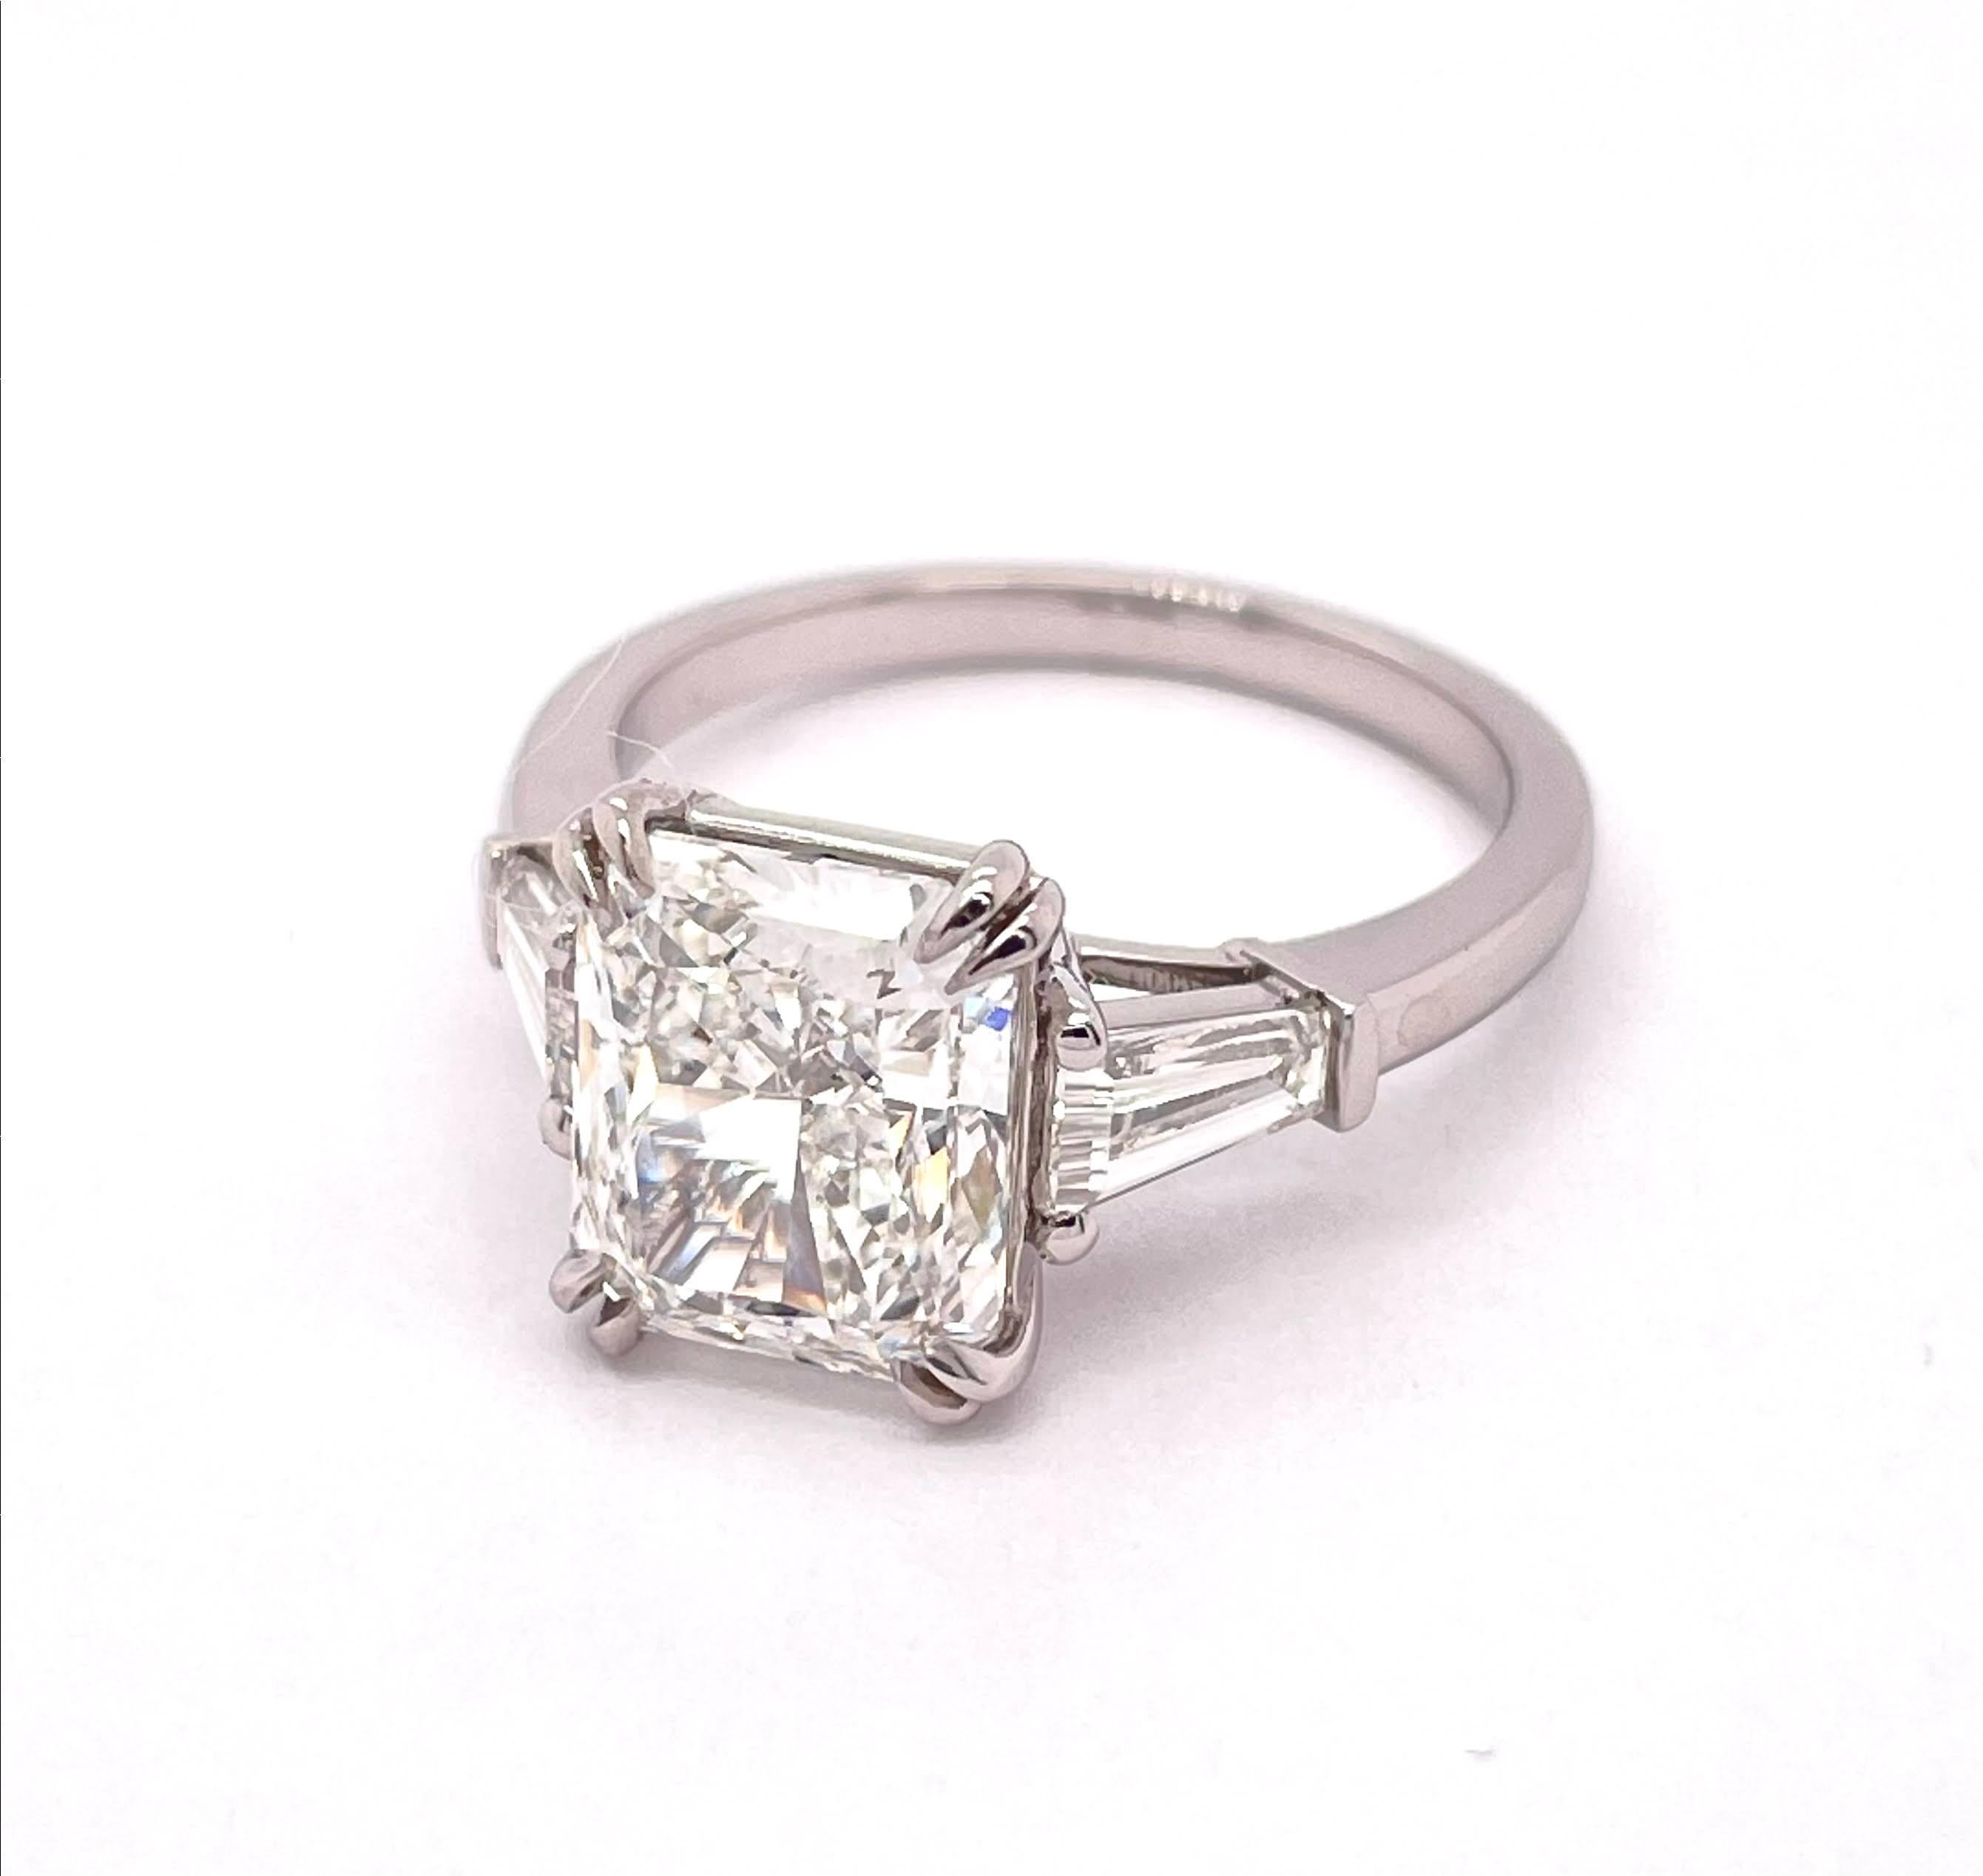 GIA Certified Radiant Shape Cut Diamond 3.54, H Color VS1 Clarity held by claw prongs with 0.73 Tapered Baguettes on each side to glide smoothly on the platinum mounting. Made to perfection with the highest quality. 
